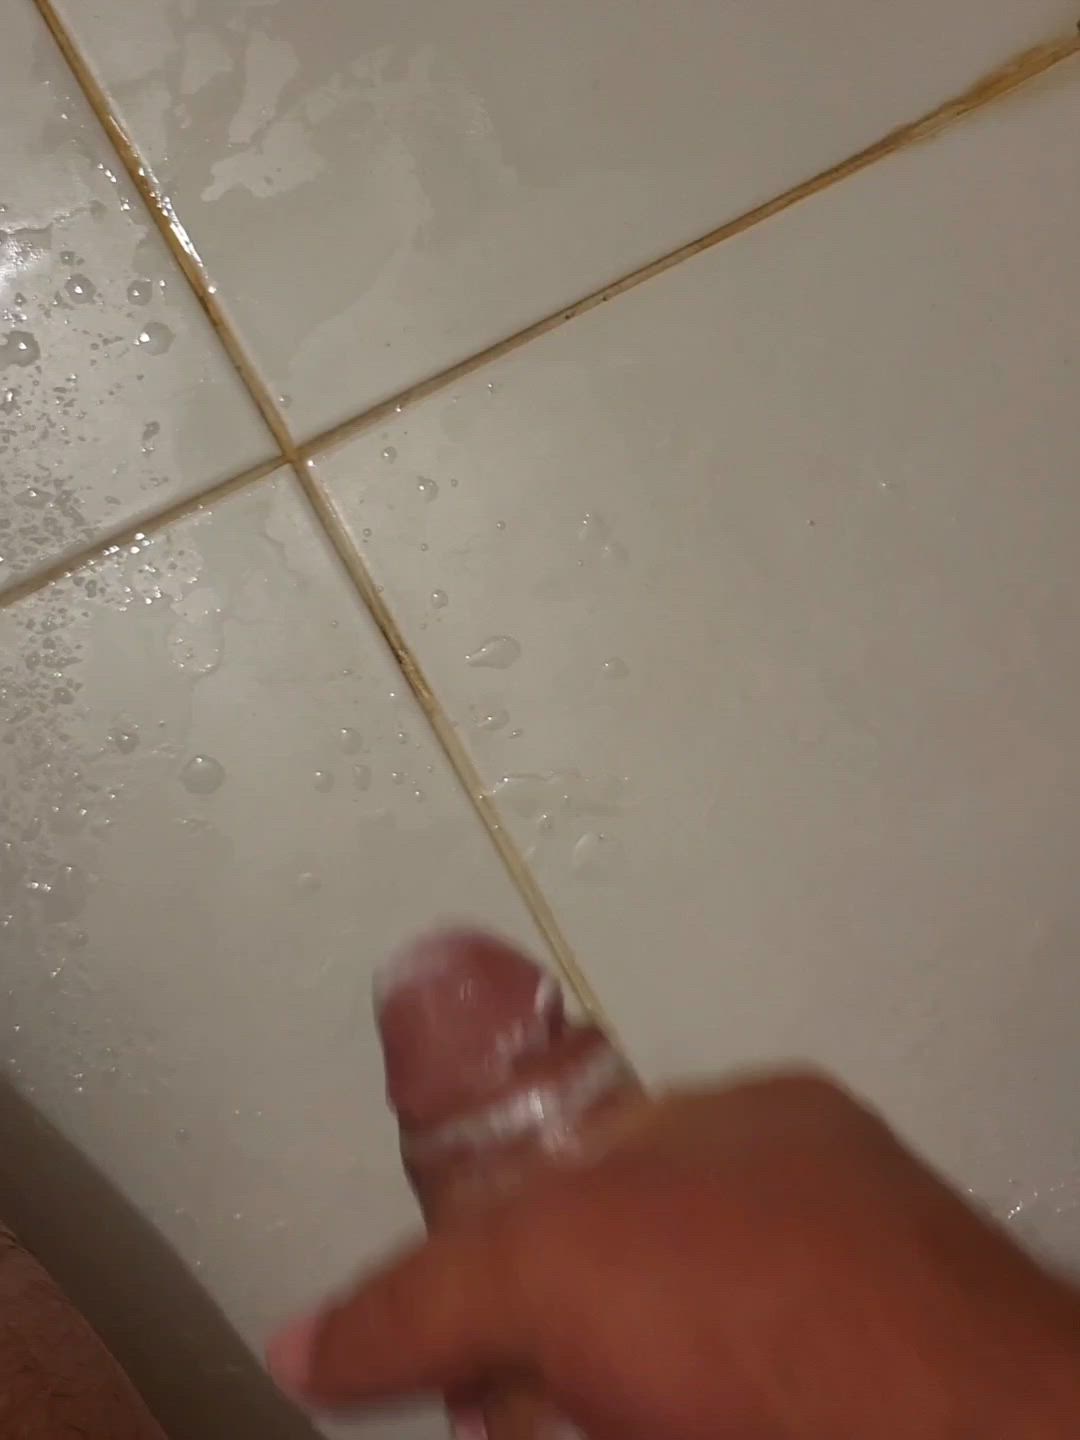 Amateur porn video with onlyfans model vegetable wolf <strong>@rostislav99</strong>